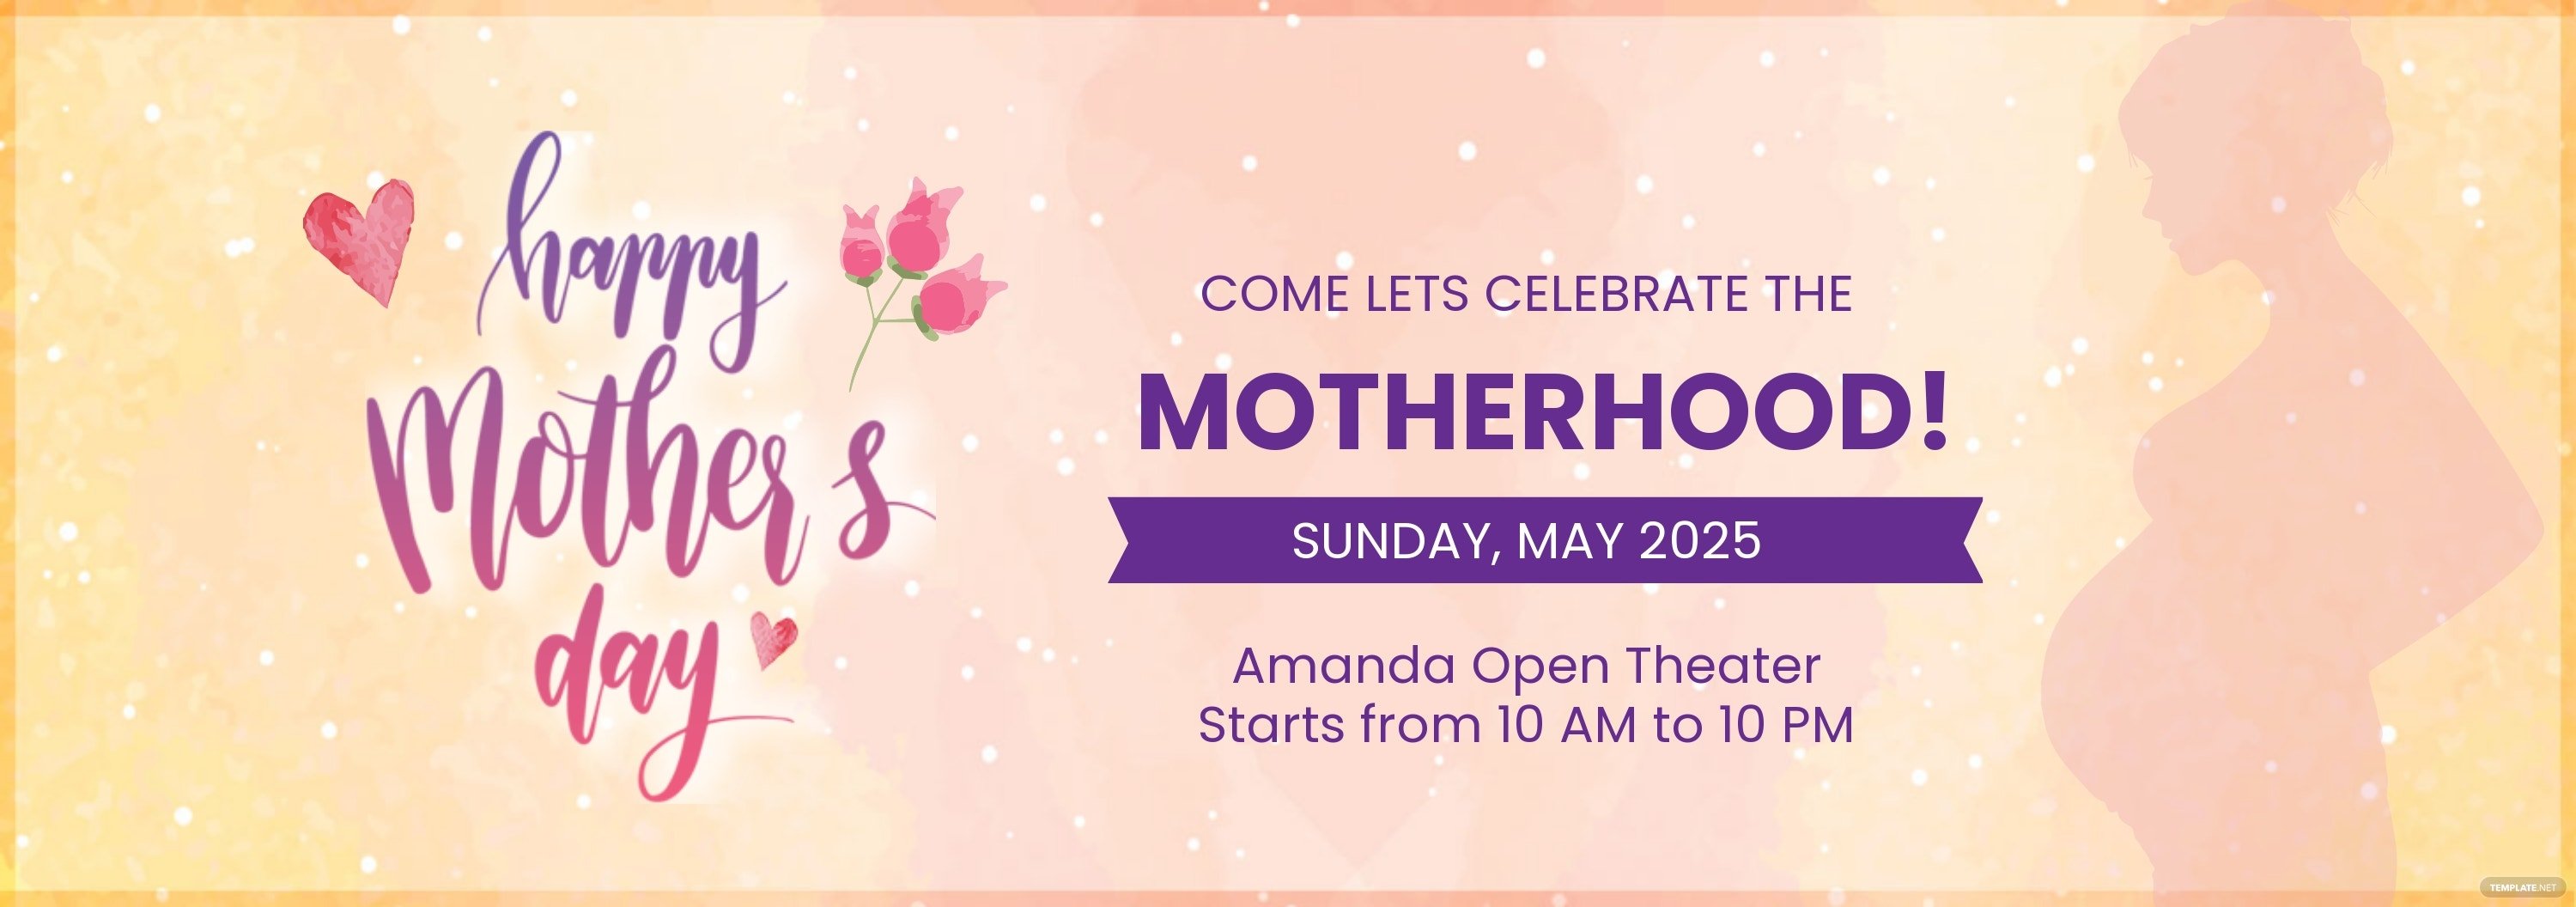 mothers-day-tumblr-banner-template